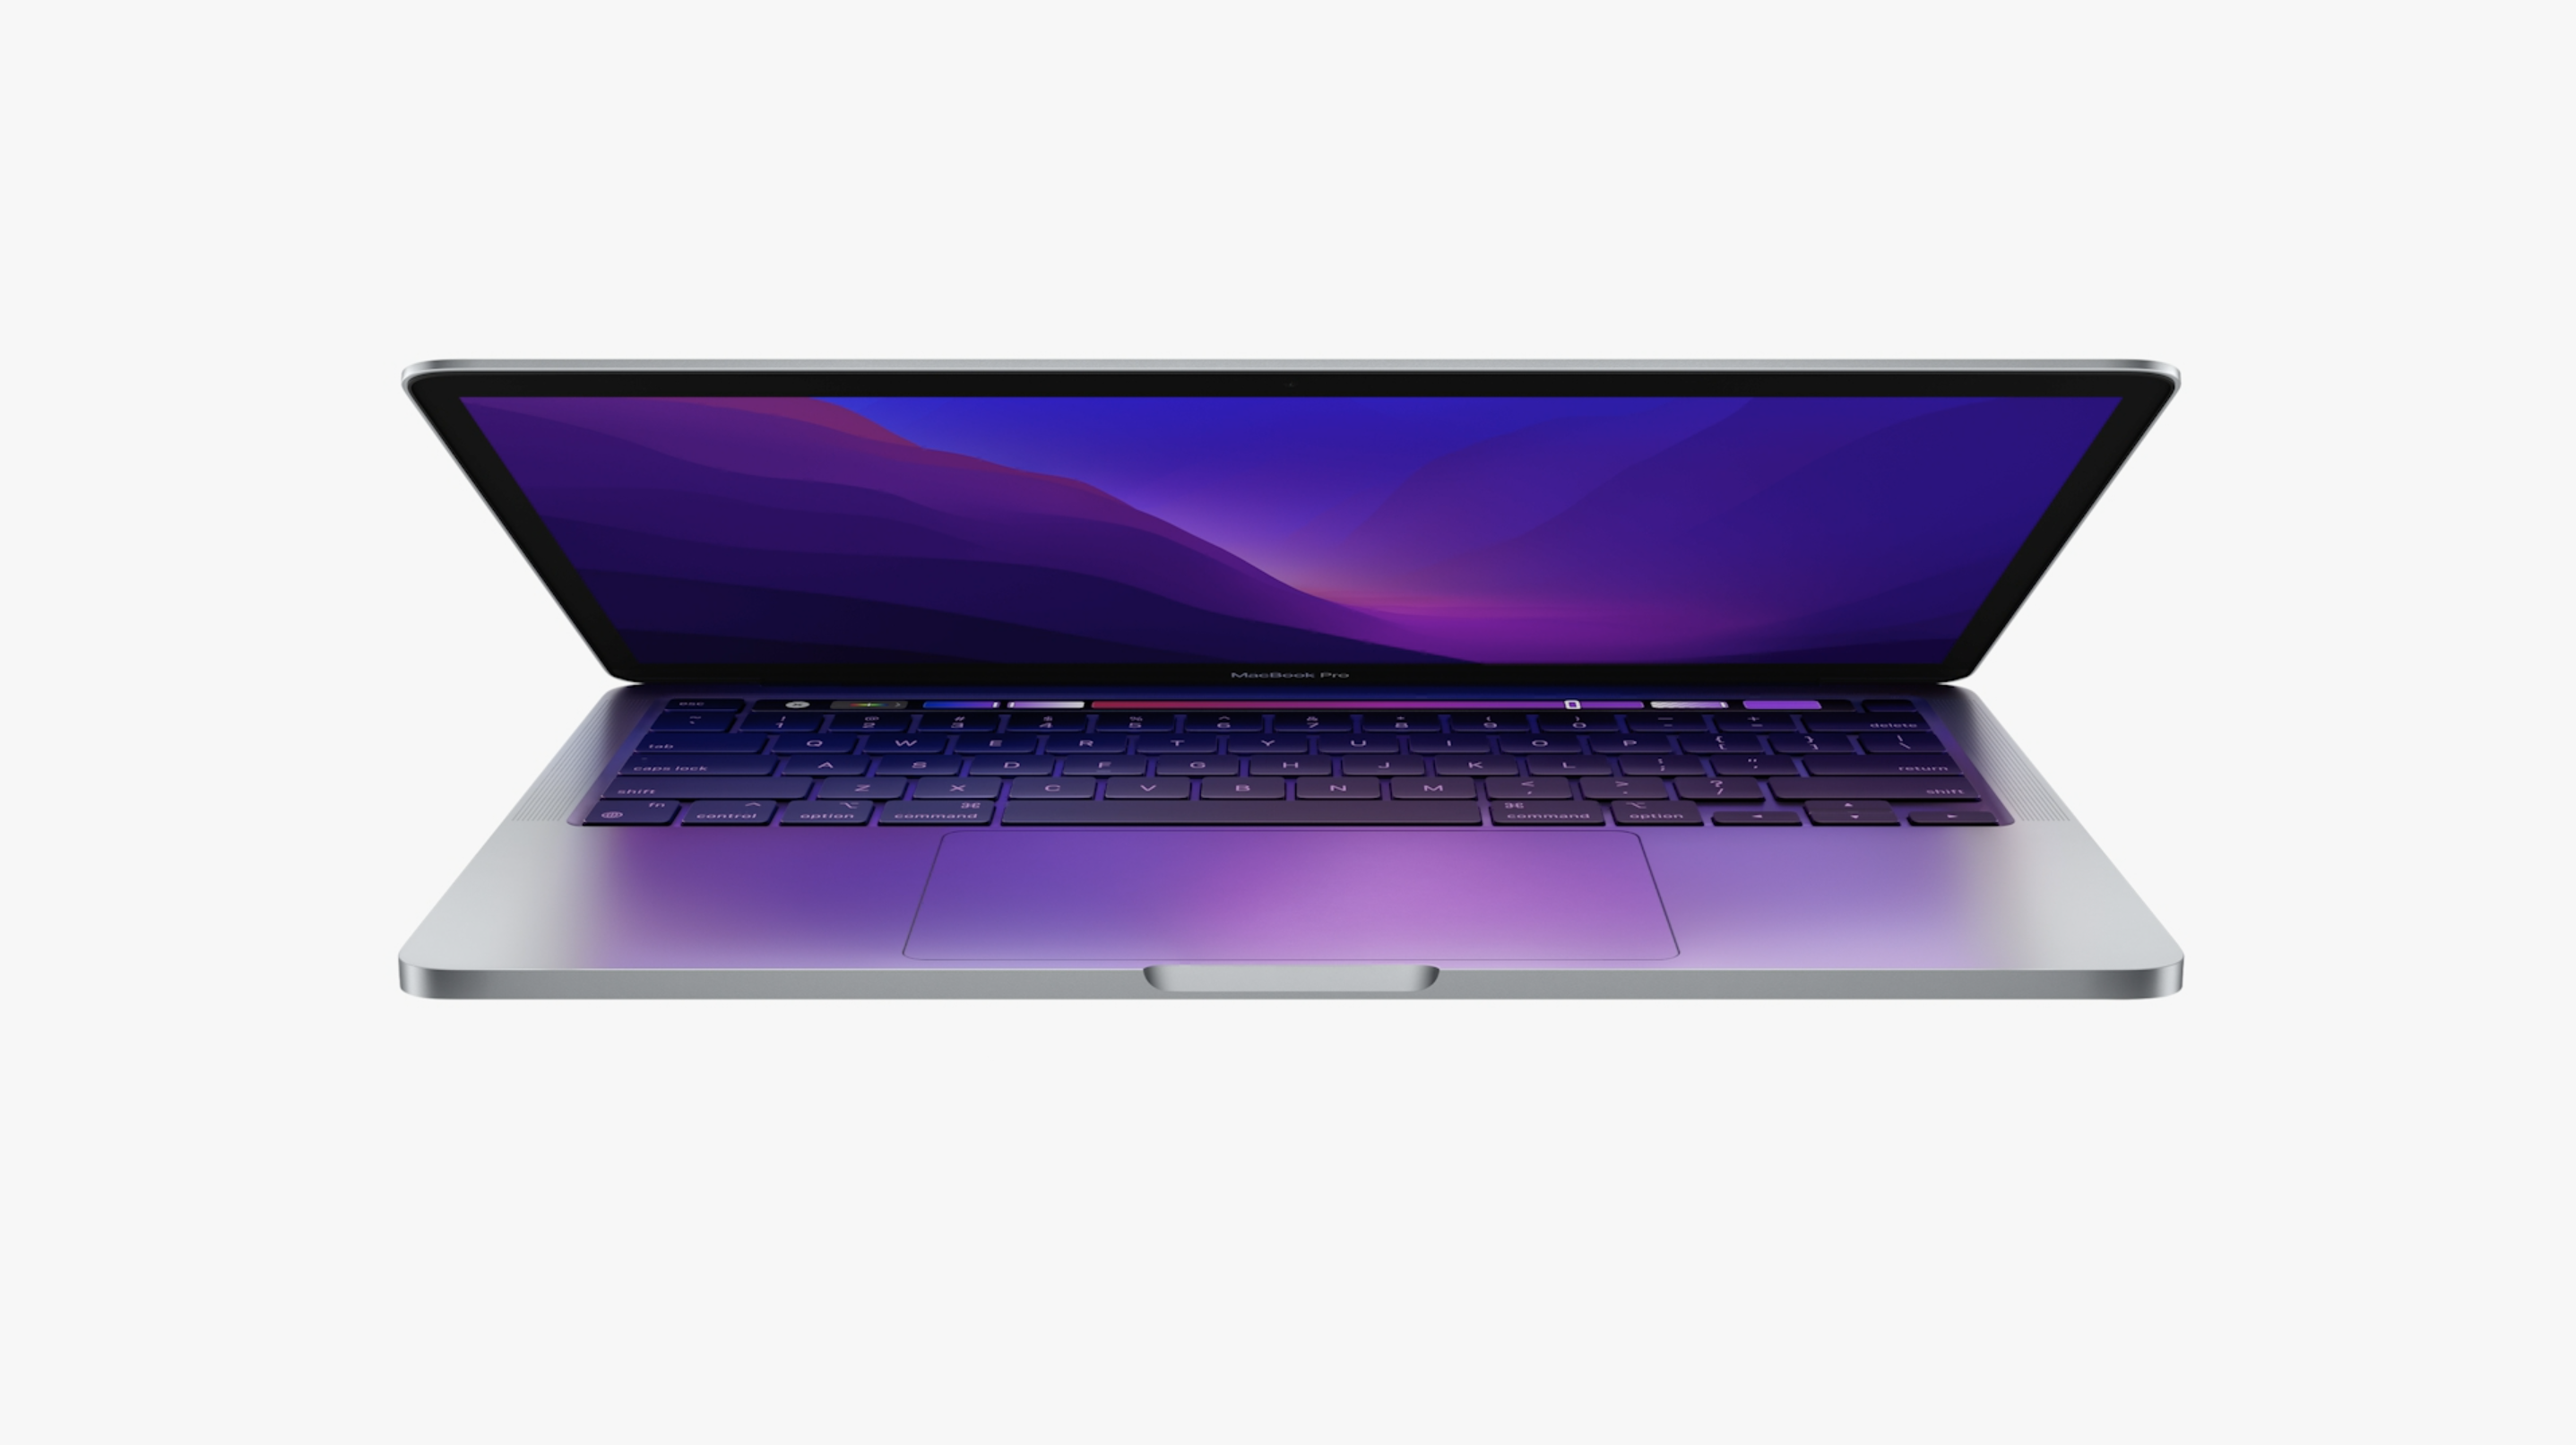 the 2022 MacBook Pro at WWDC 2022